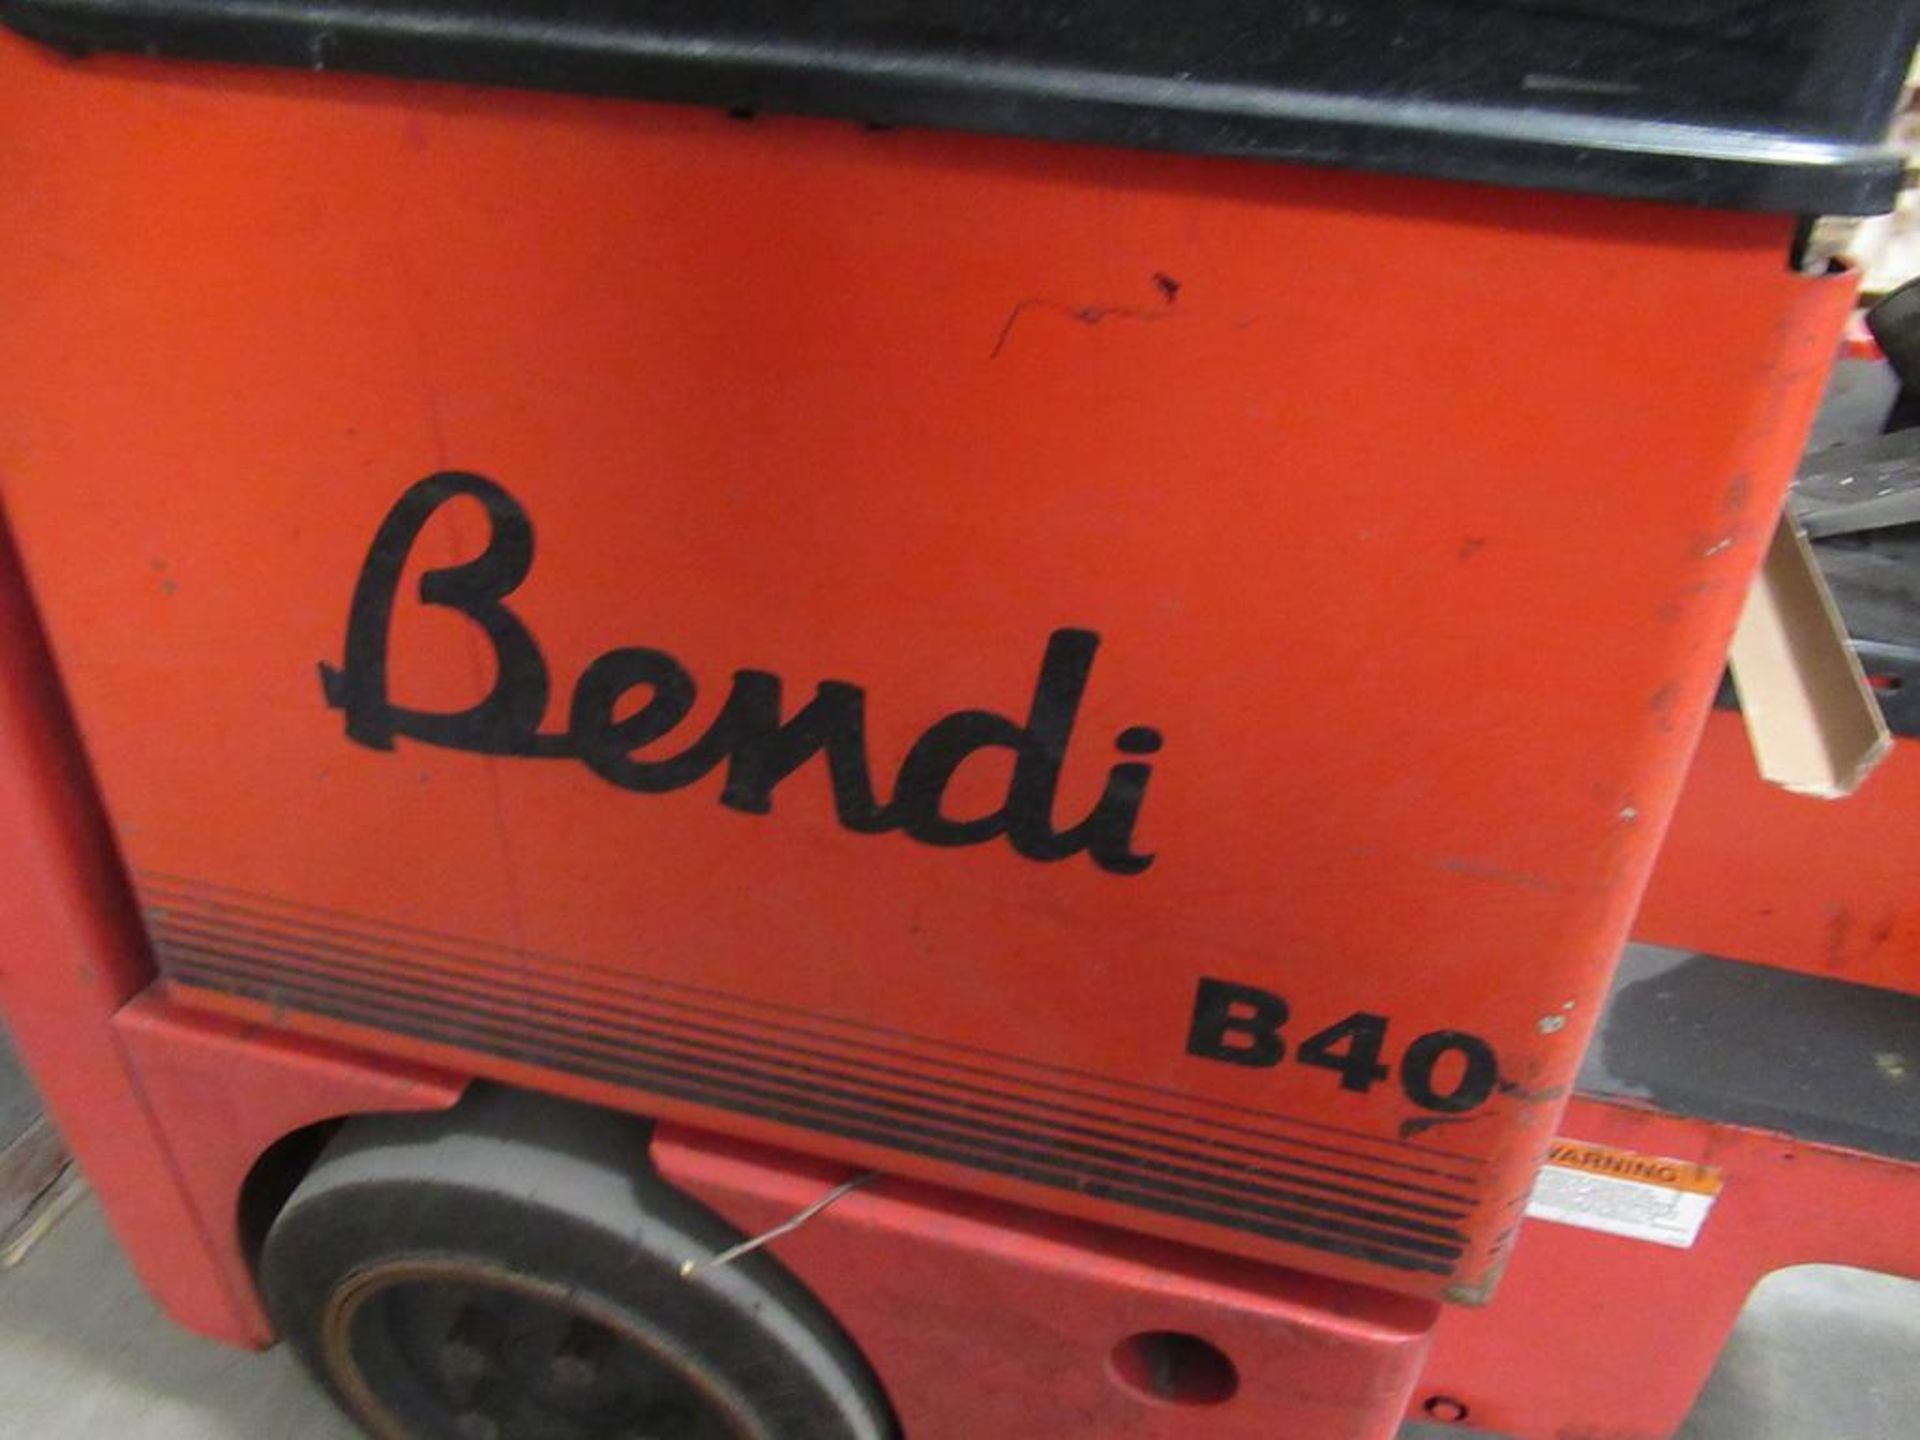 Trans lift Bendi B40 Articulated Fork Lift Truck (Does not Run) and a Chloride Motive Power 21 Ove - Image 10 of 11